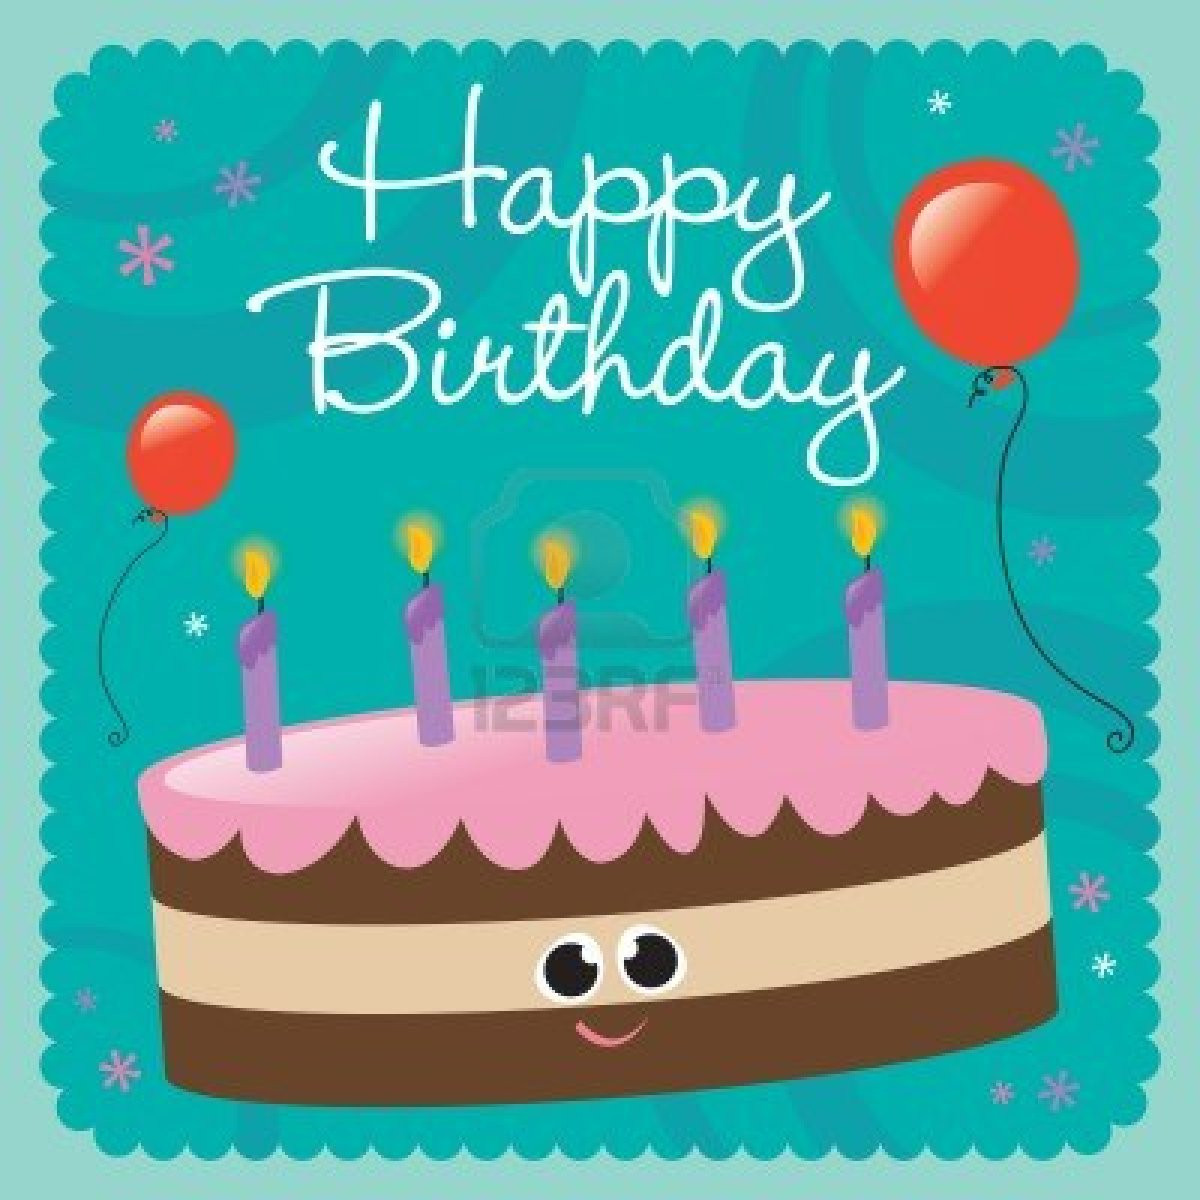 Cards Happy Birthday
 35 Happy Birthday Cards Free To Download – The WoW Style